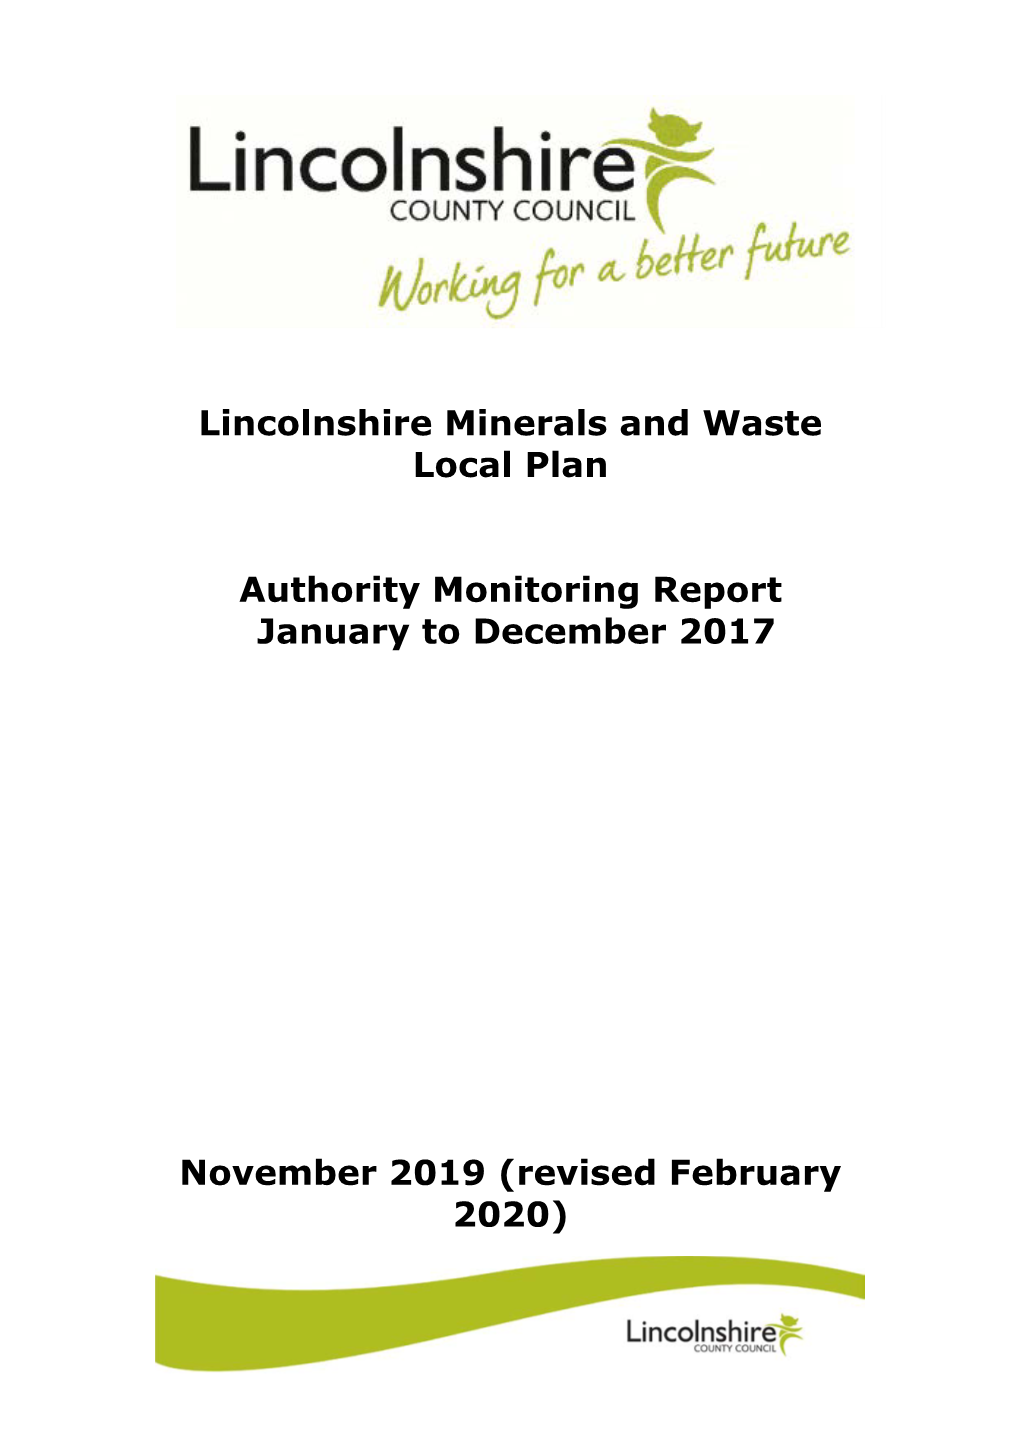 Authority Monitoring Report January to December 2017